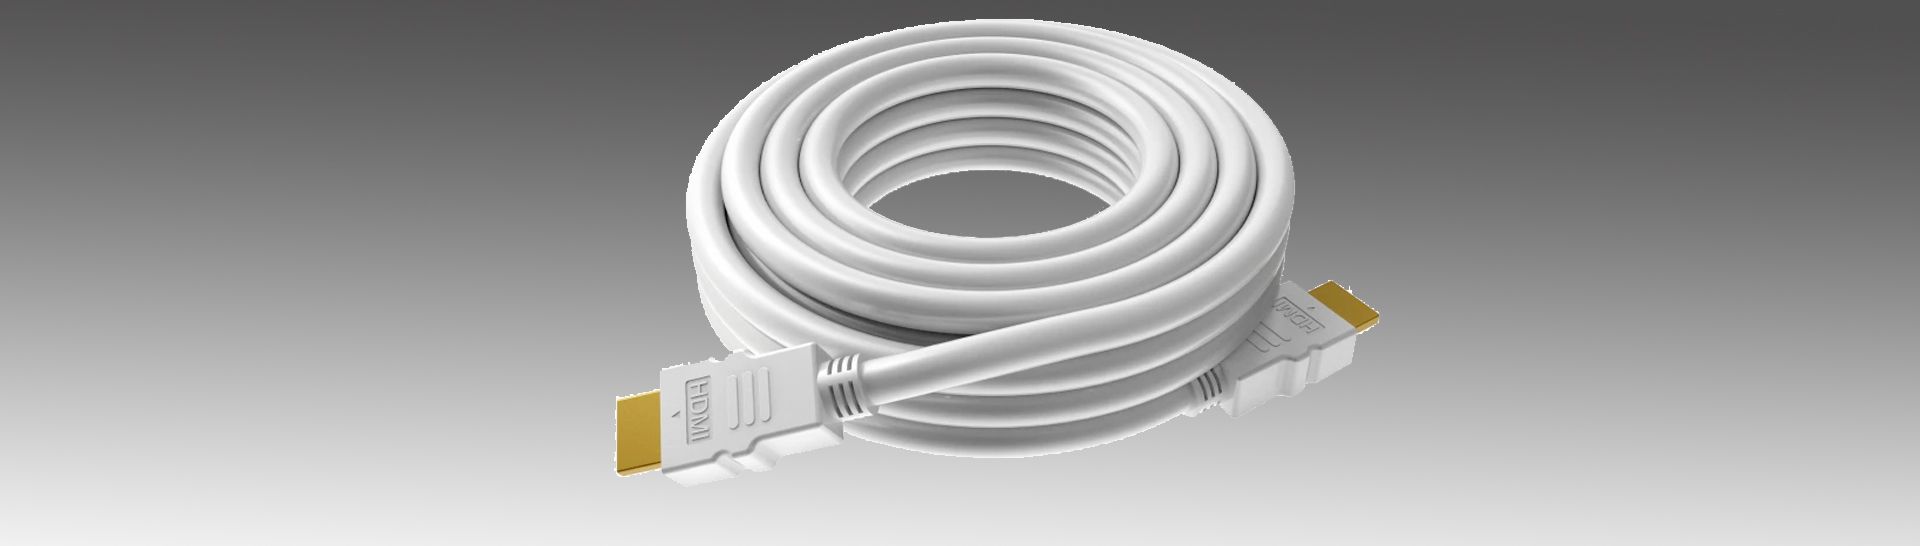 Techconnect Faceplate Cables from Projectorpoint